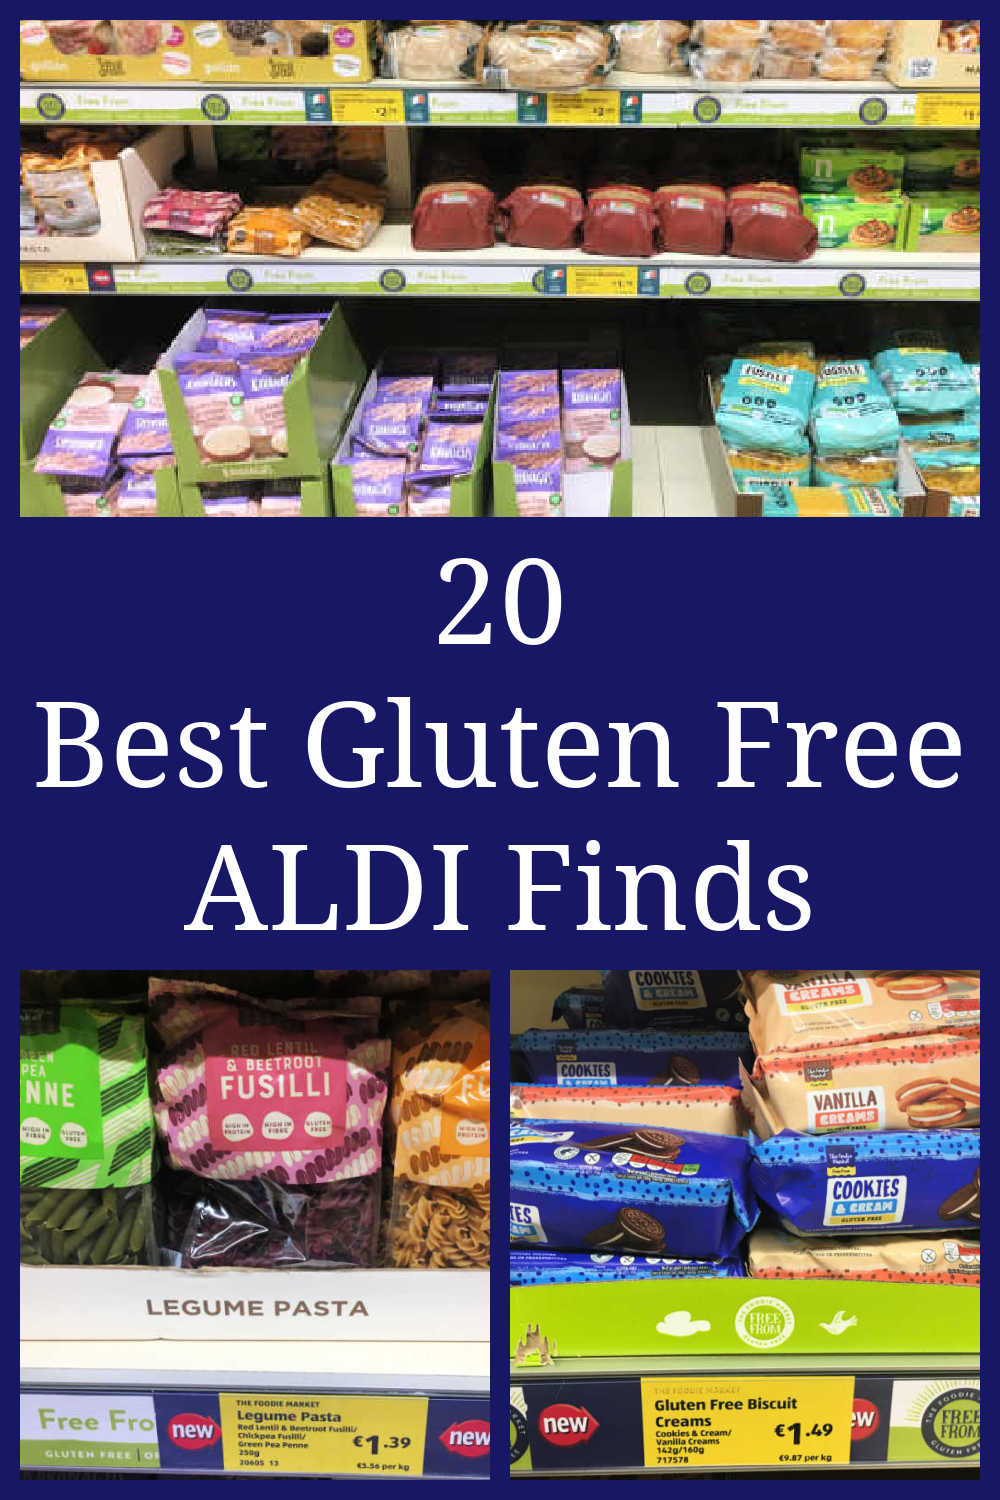 Gluten Free Aldi Products - 20 top finds and the best gluten-free foods at budget friendly Aldi supermarkets - with a video tour of my local store.